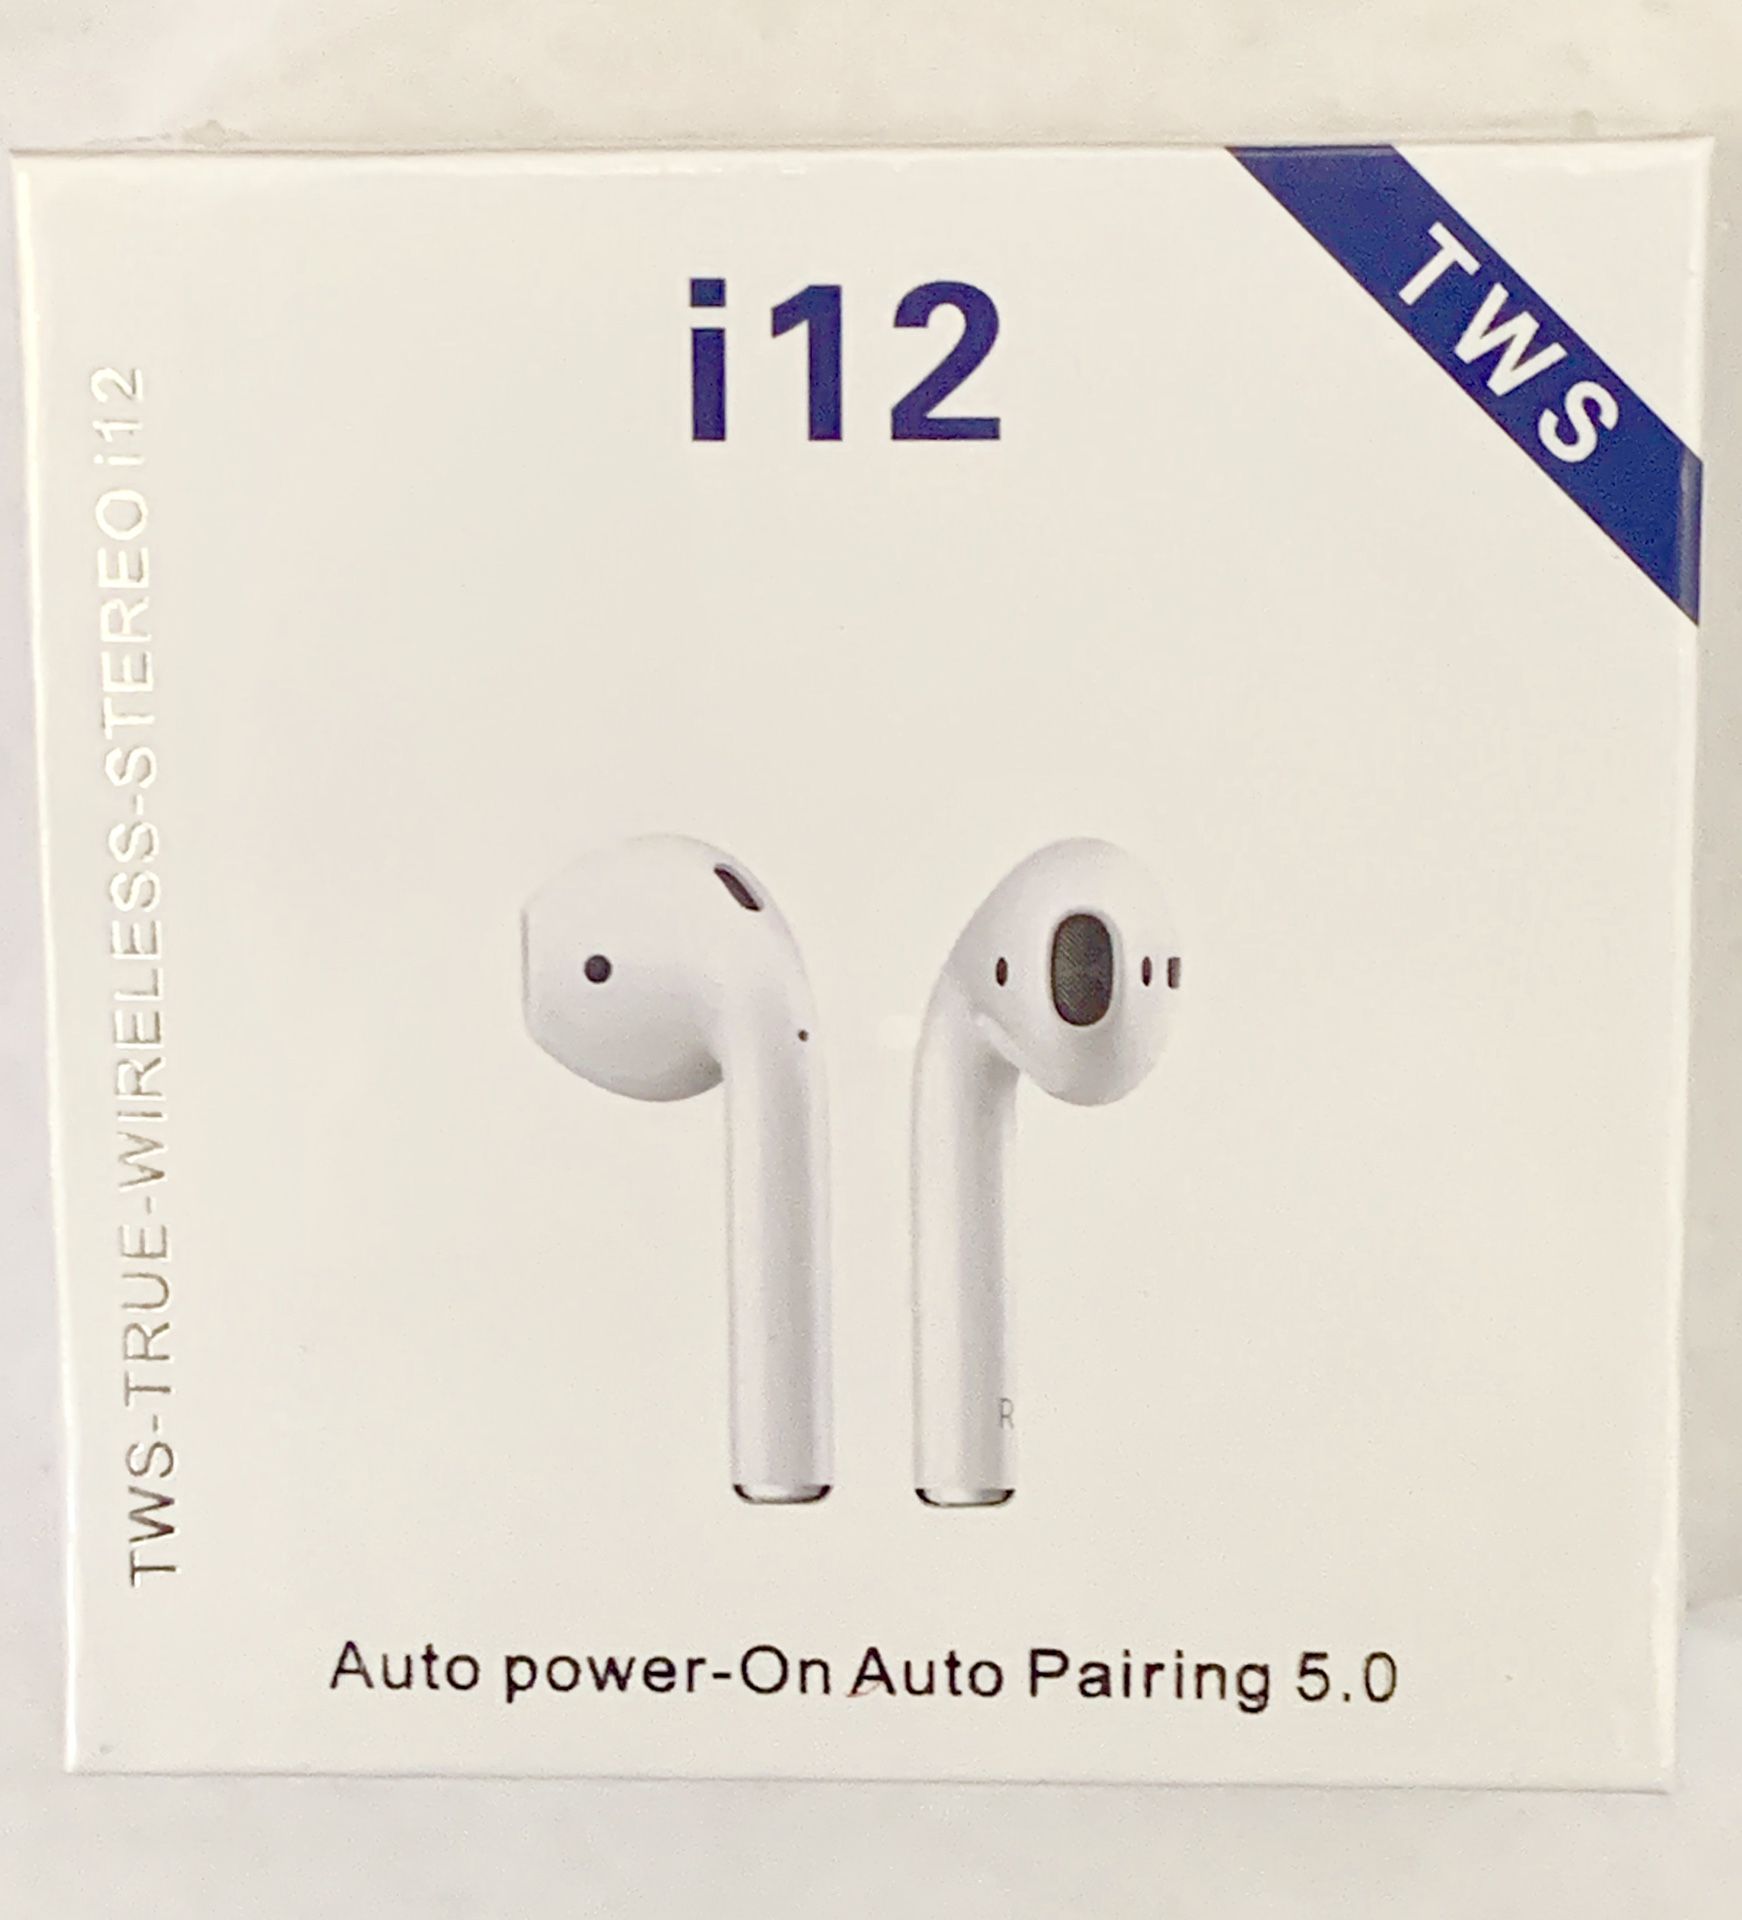 Airpods i12 Earpiece Earphones With Charger Box